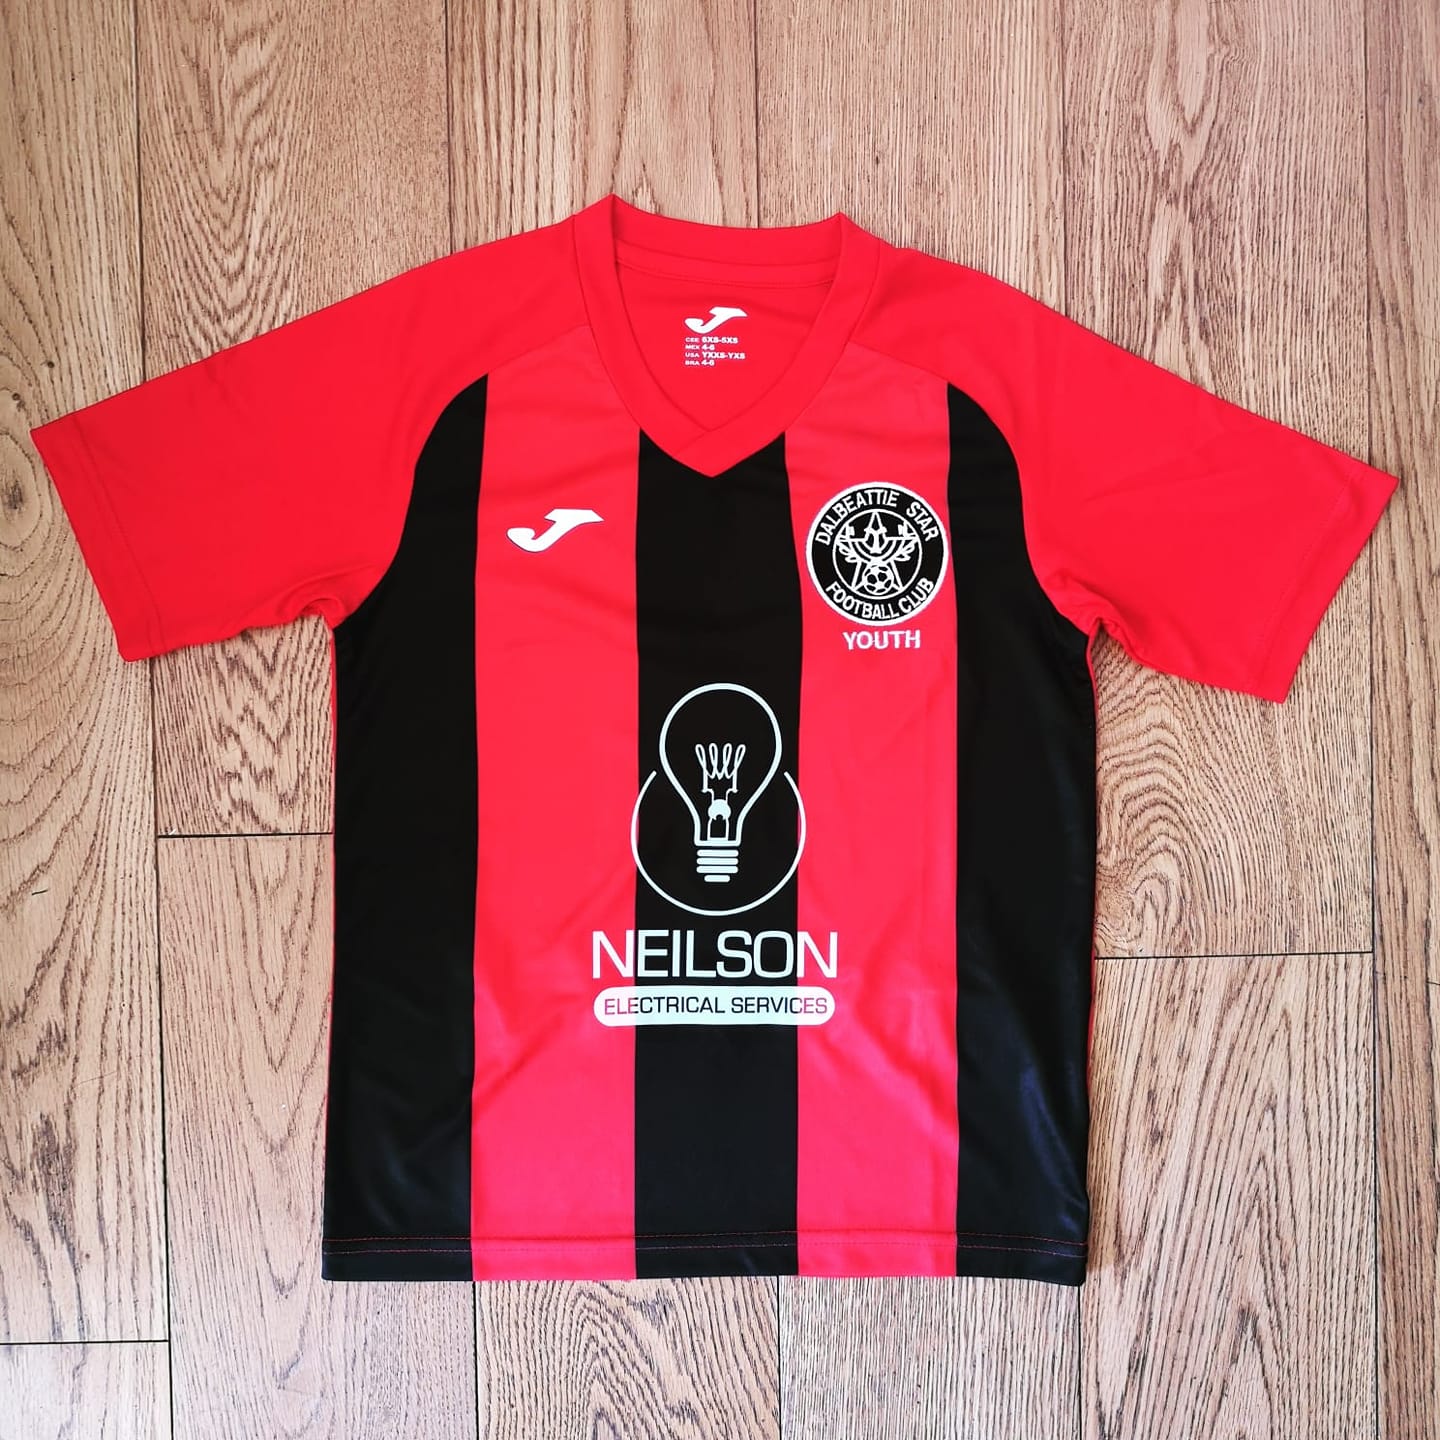 Dalbeattie Star Youth Football Club team strip sponsored by Neison Electrical Services